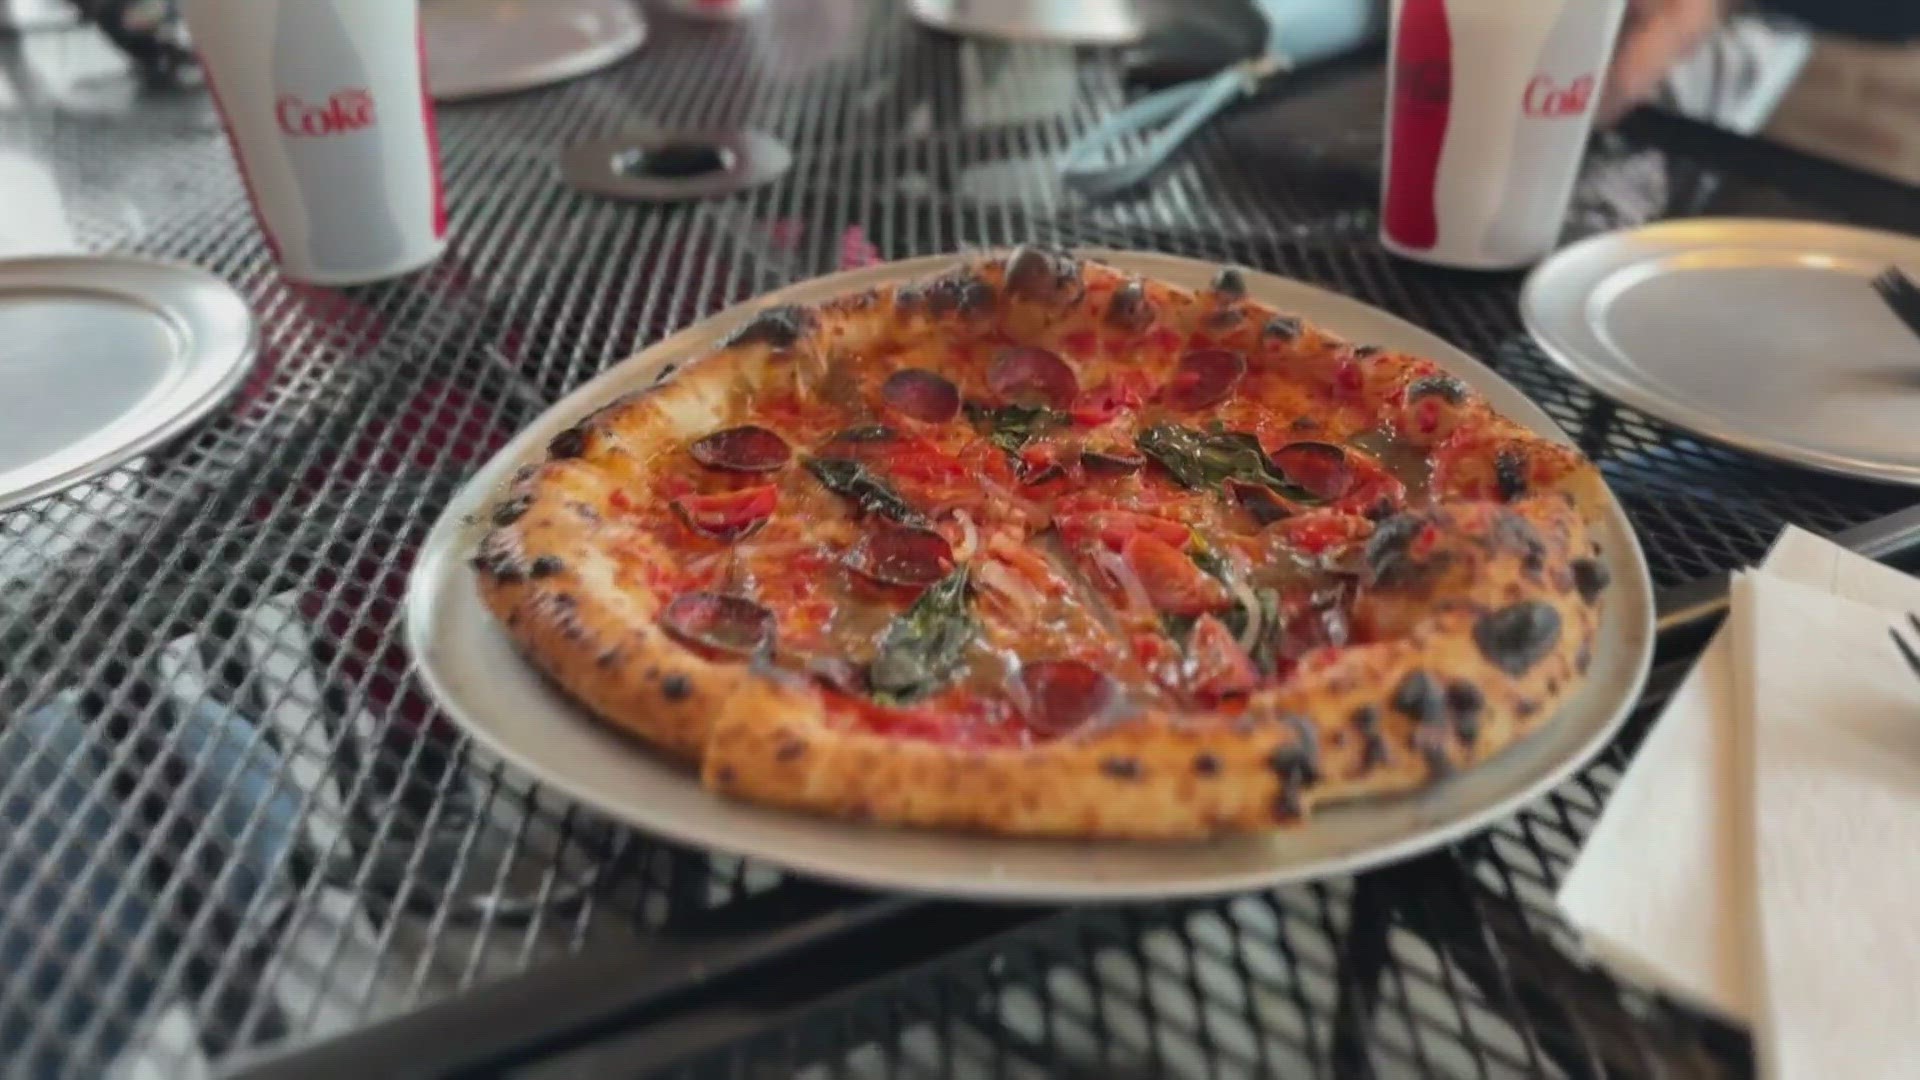 3News' Austin Love visited ETalian in Chagrin Falls to check out their homemade pizza.